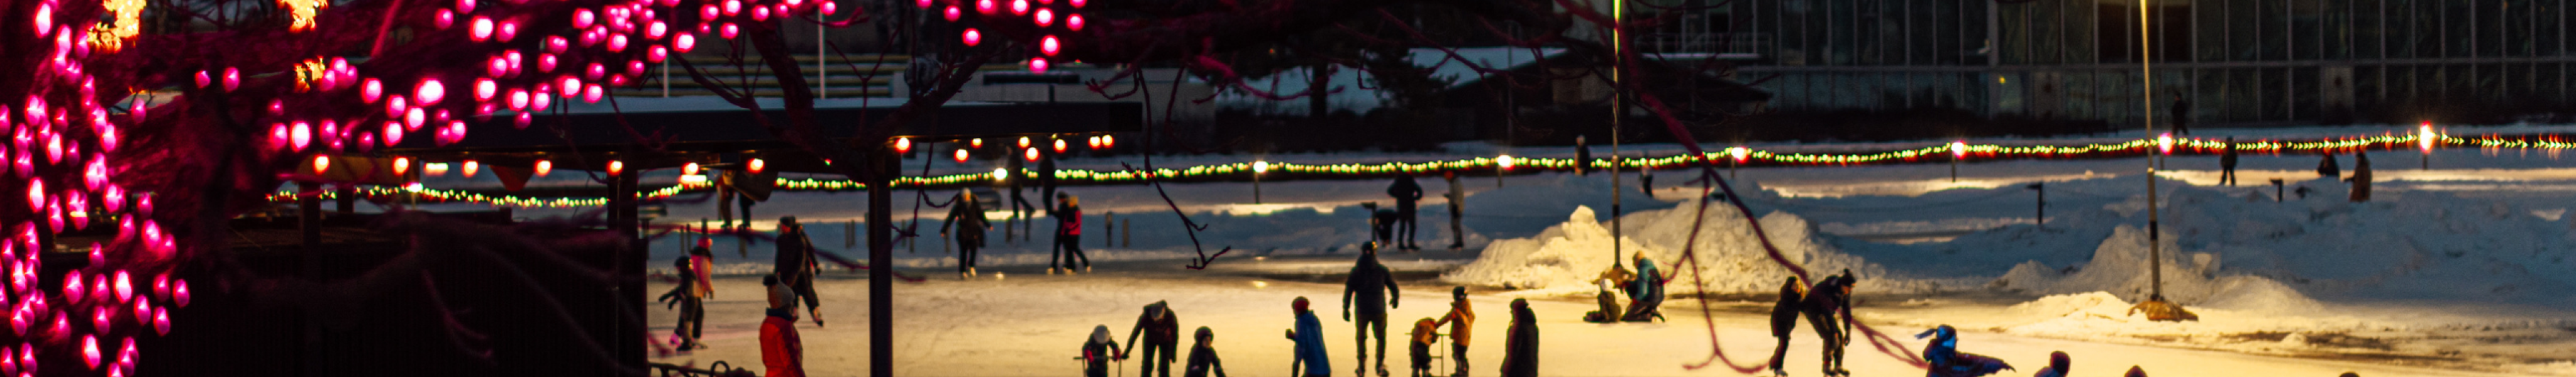 Evening lights of Tapiola Ice Garden with people ice skating